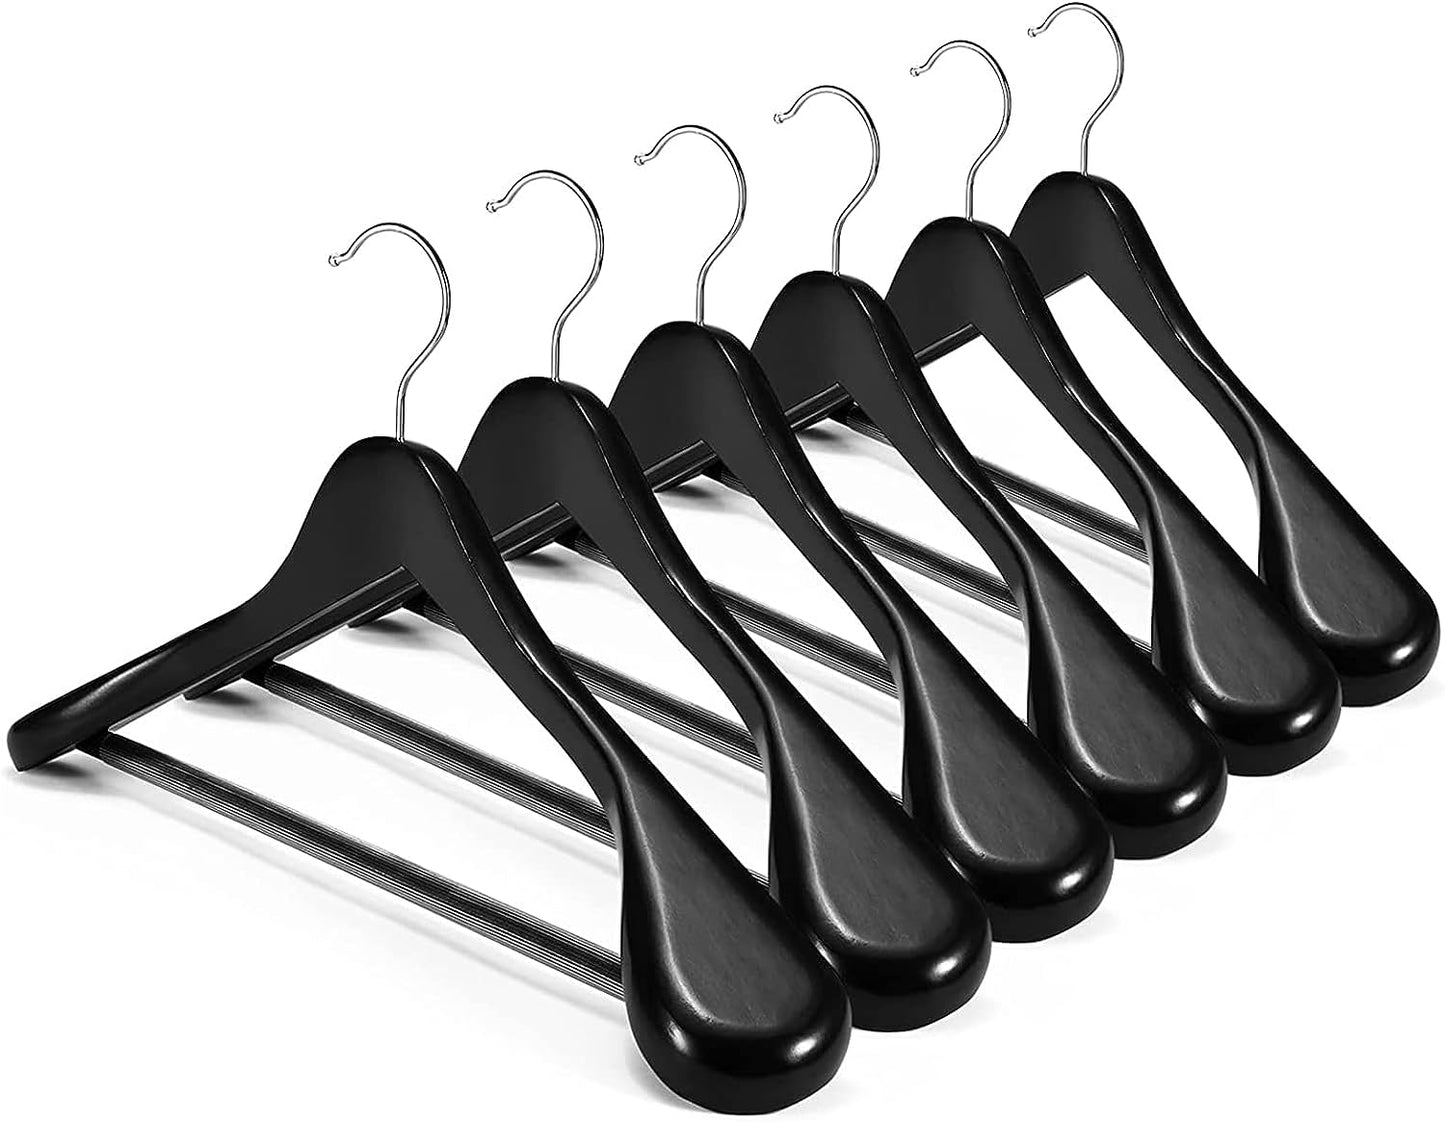 HOUSE DAY 17.7 Inch Solid Wood Coat Hangers Black 6 Pack